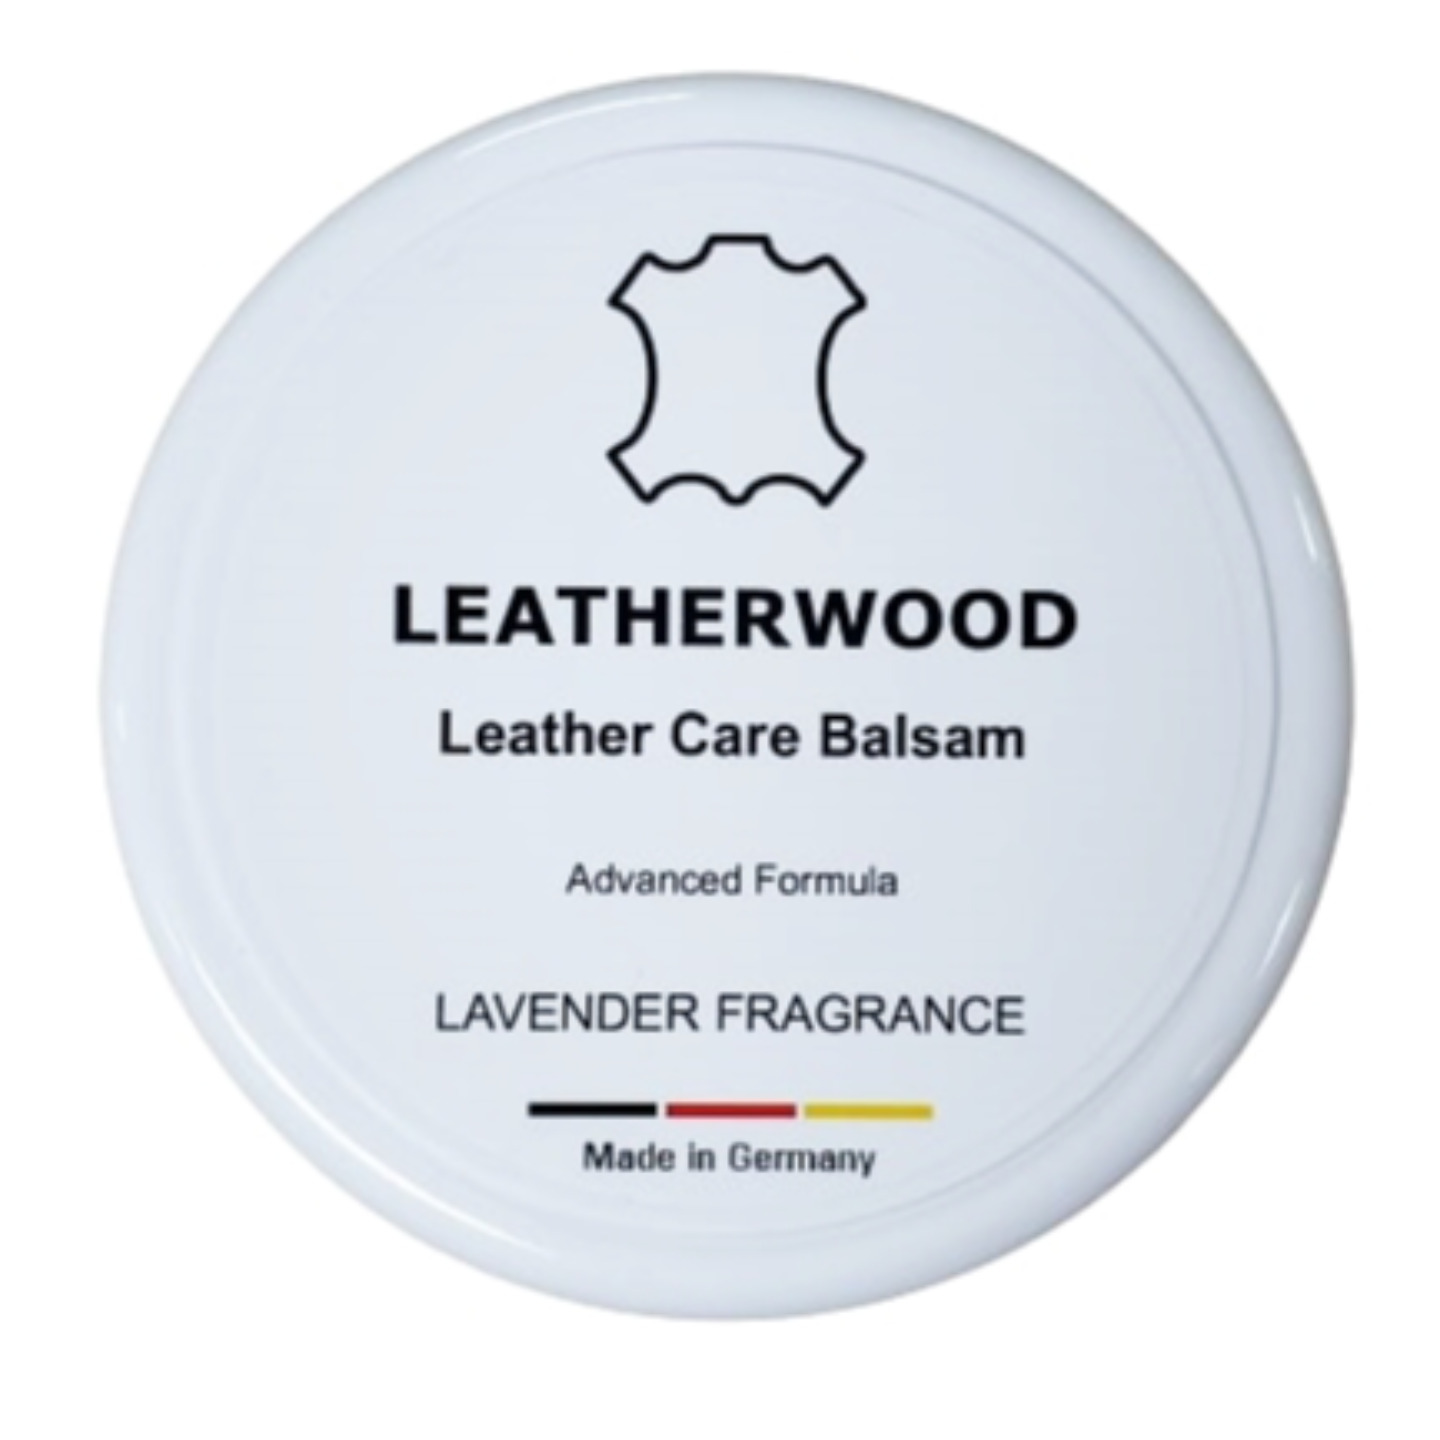 Leatherwood Balsam 250ml - (LAVENDER) - Cleaner, Conditioner ,Water Repellent - All Leathers including Shoes, Handbags, Garments, Furniture, Automotive Leathers - Made in Germany.